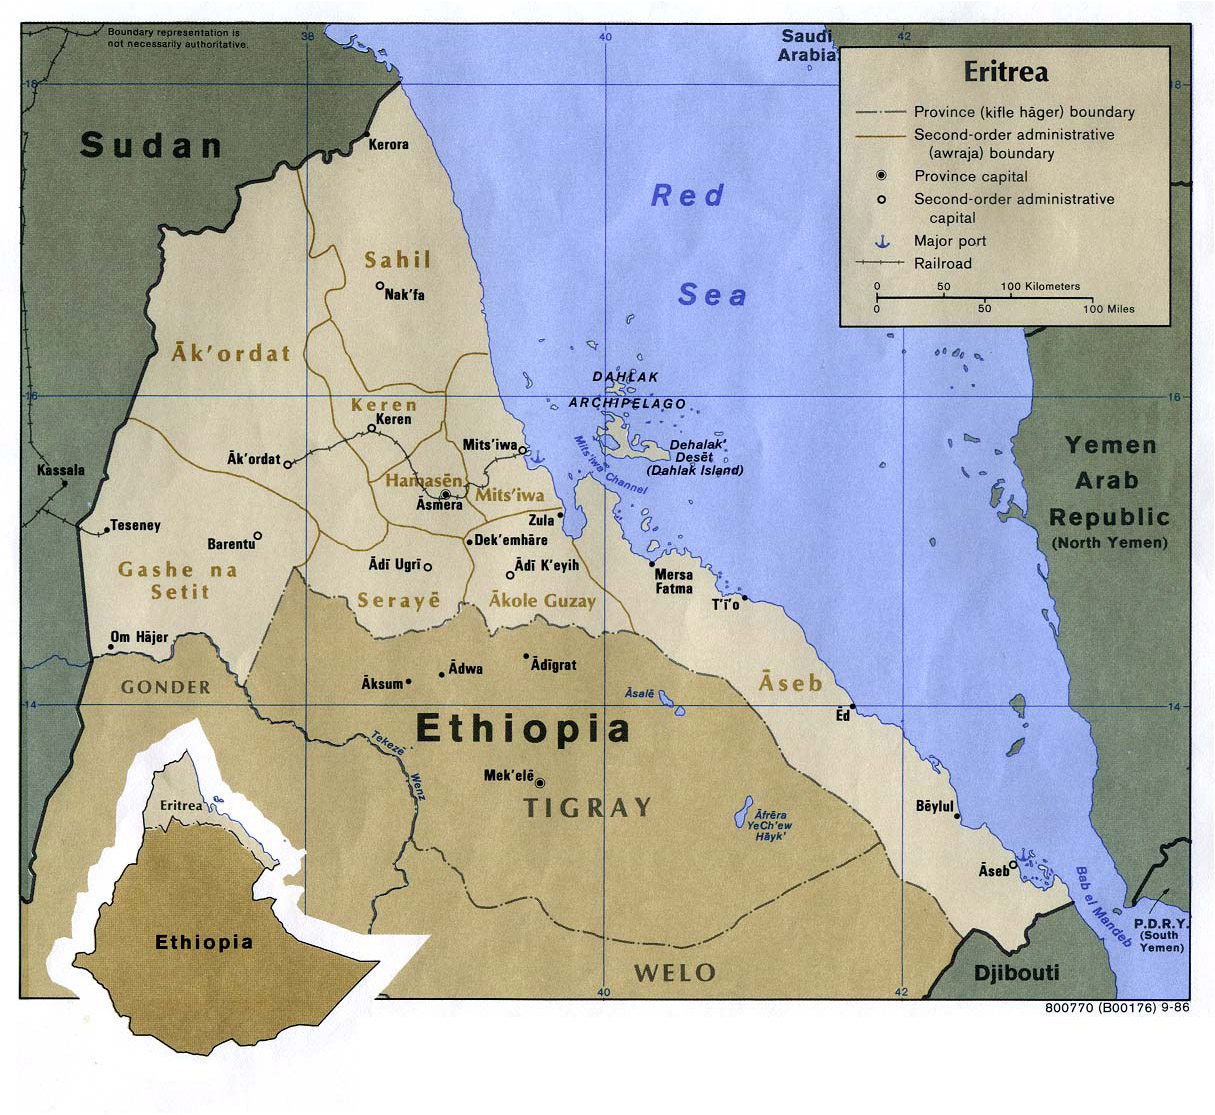 Detailed Political Map Of Eritrea With Roads Railroads Ports And Major Cities 1986 